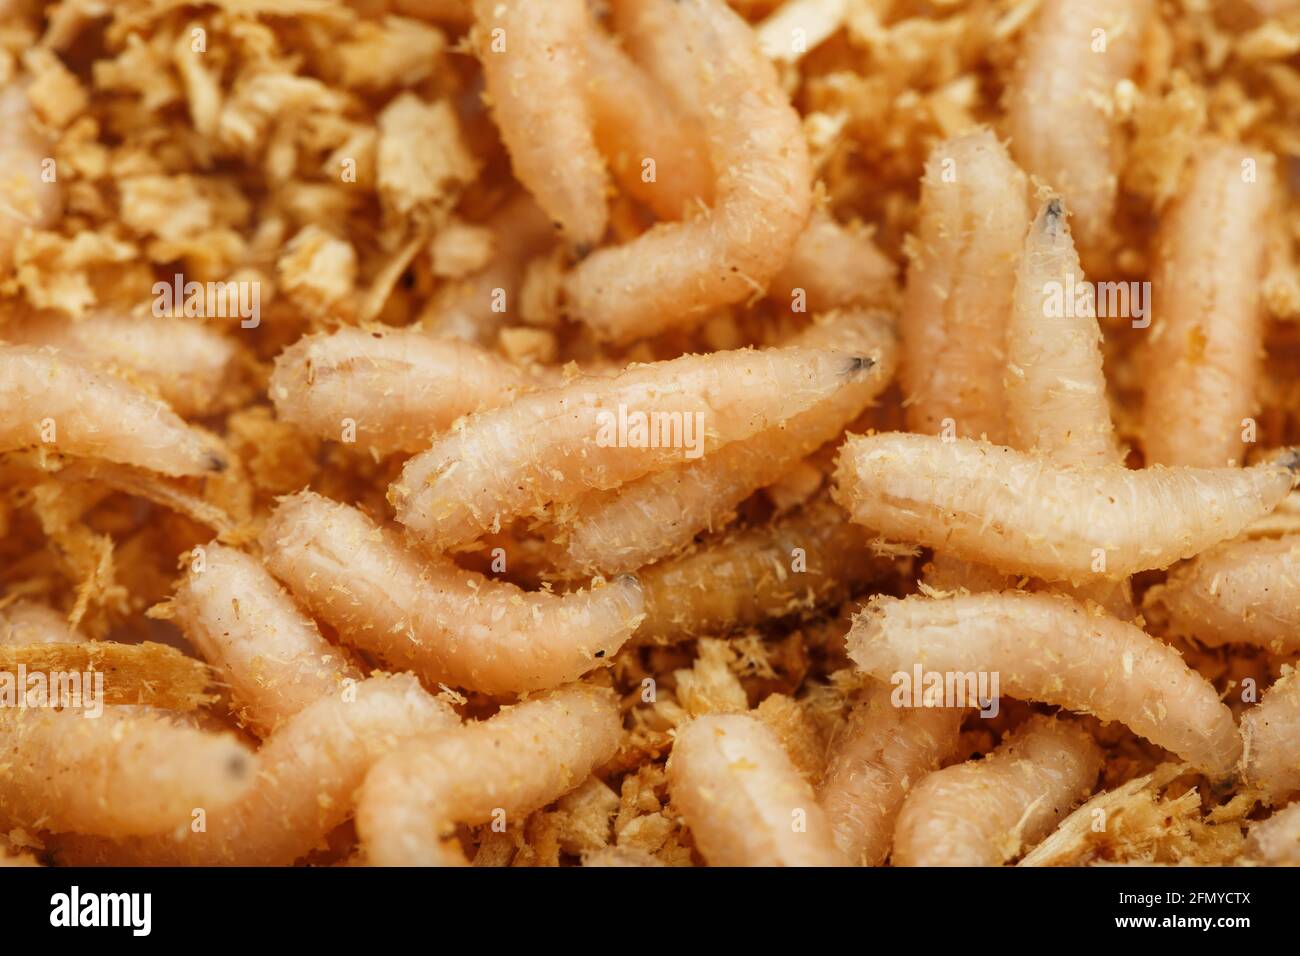 Many white blowfly larvae close-up as bait for fishing and